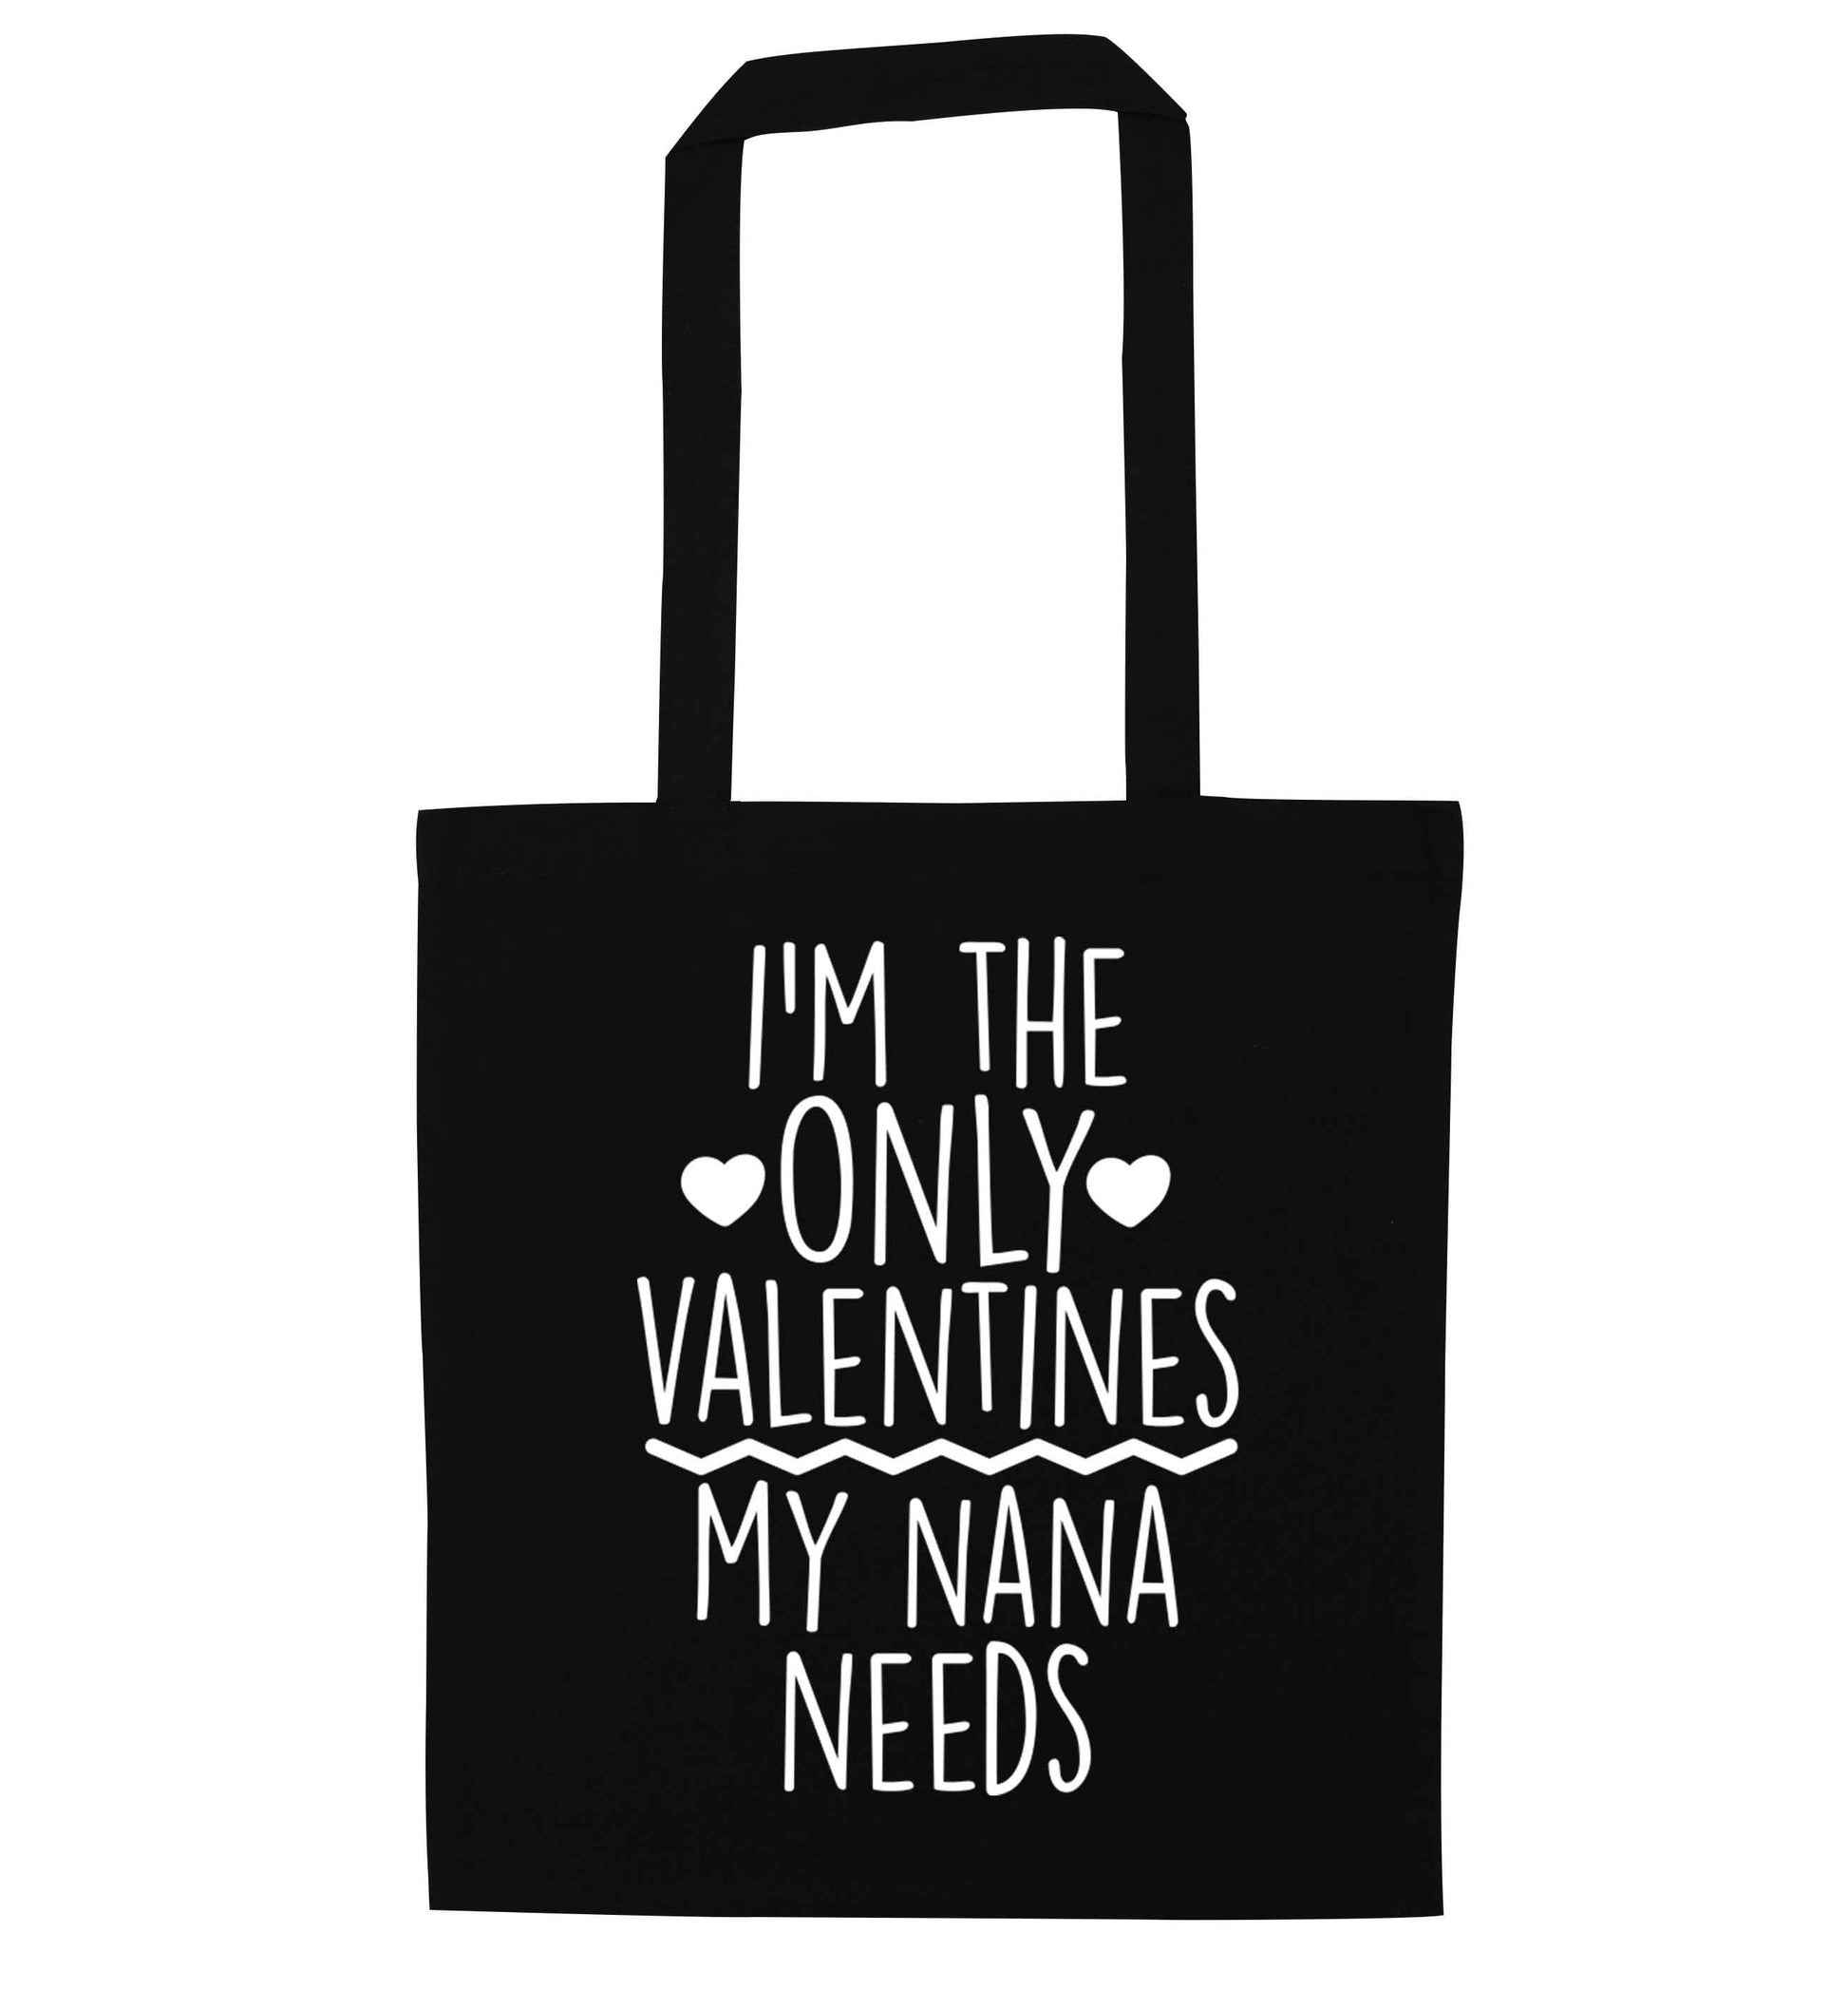 I'm the only valentines my nana needs black tote bag